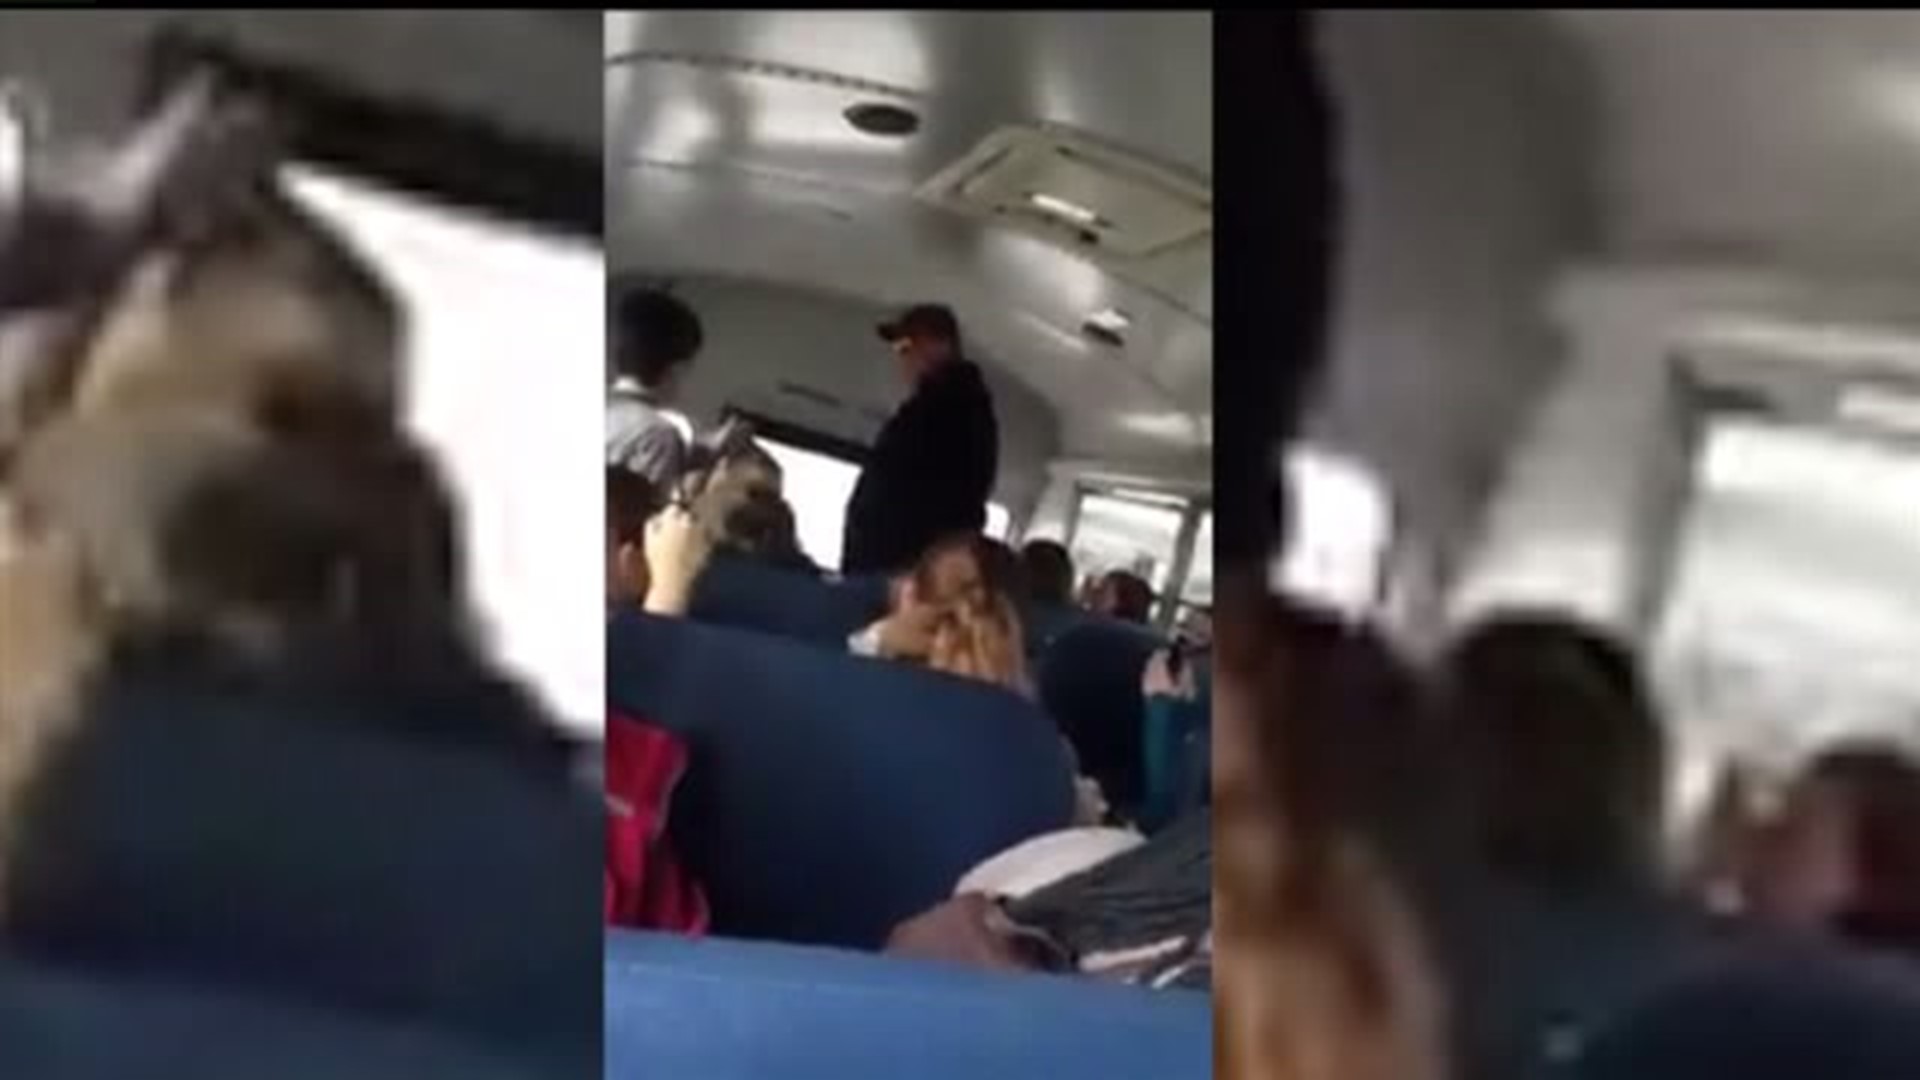 Bus driver accused of assaulting student for misbehaving